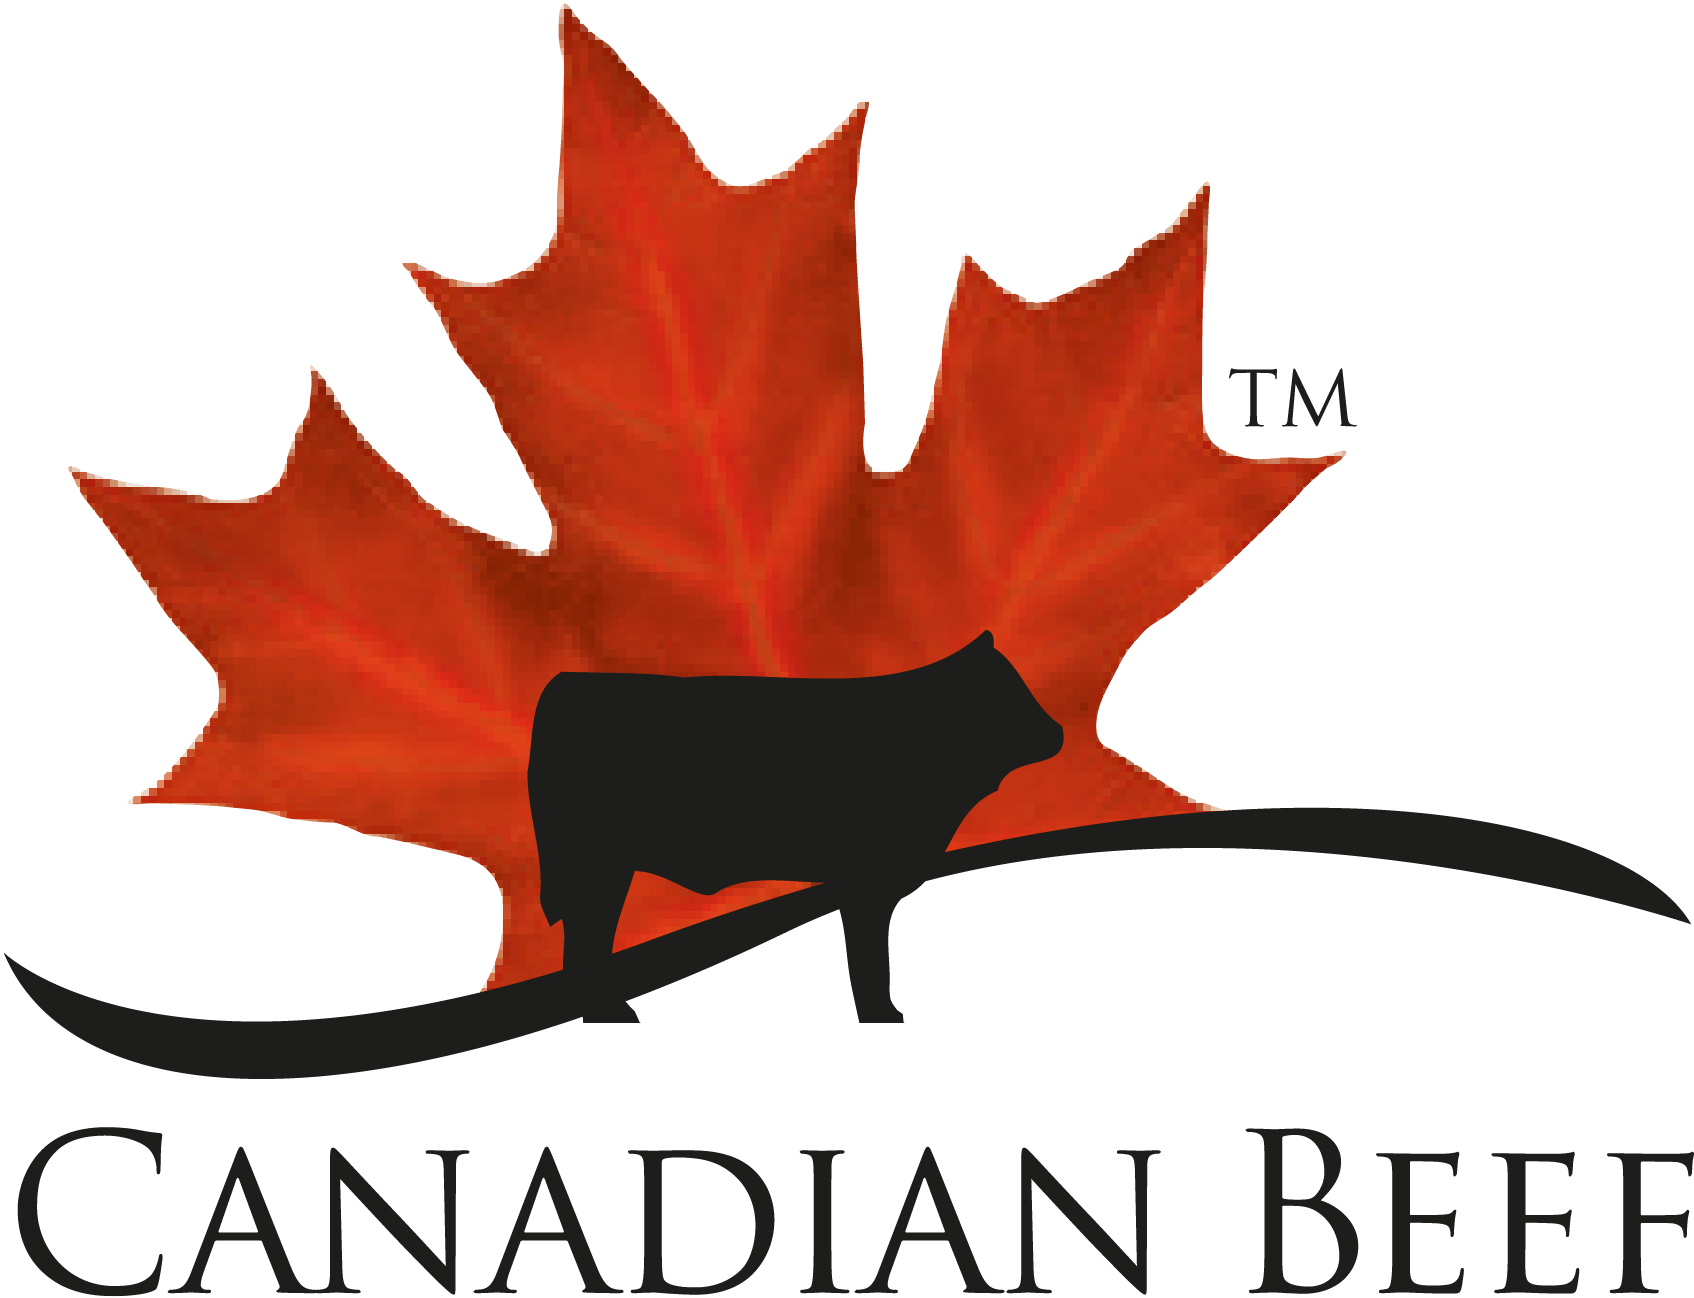 Canada Beef Logo png